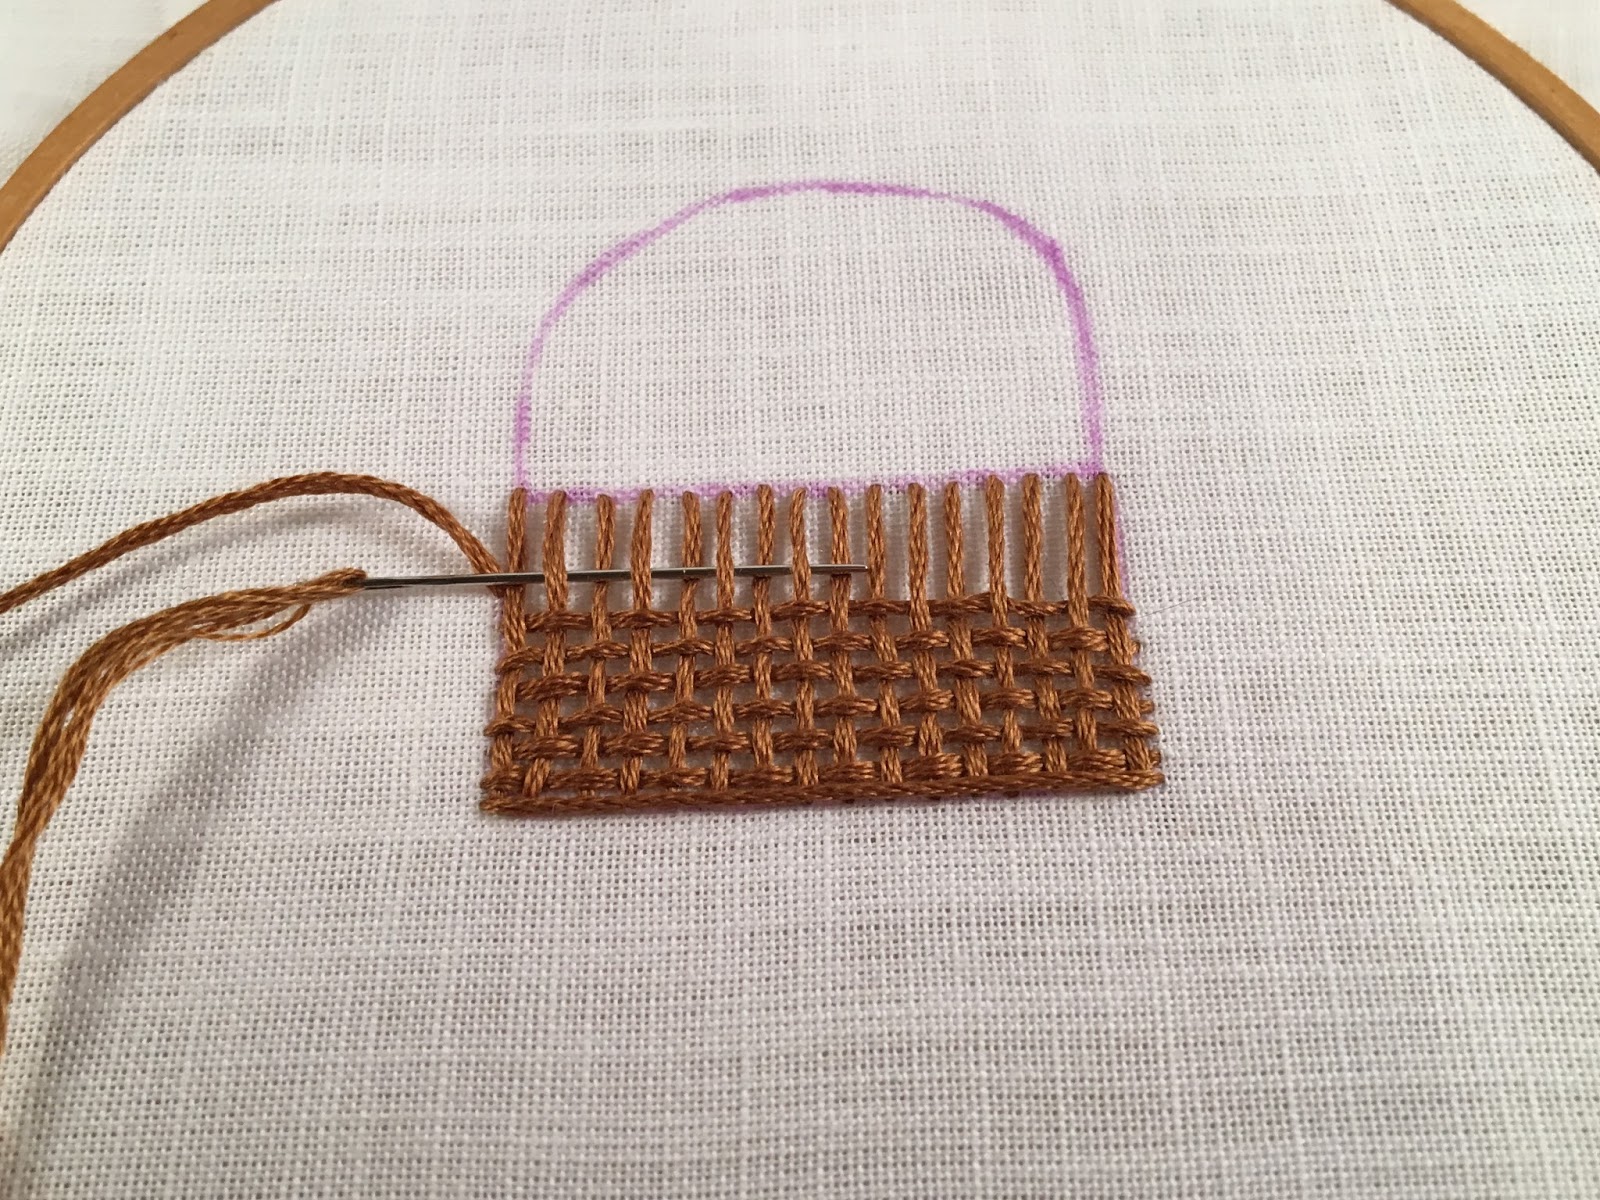 Woven Basket with flowers, a tutorial by Michelle for Mooshiestitch Monday on Feeling Stitchy